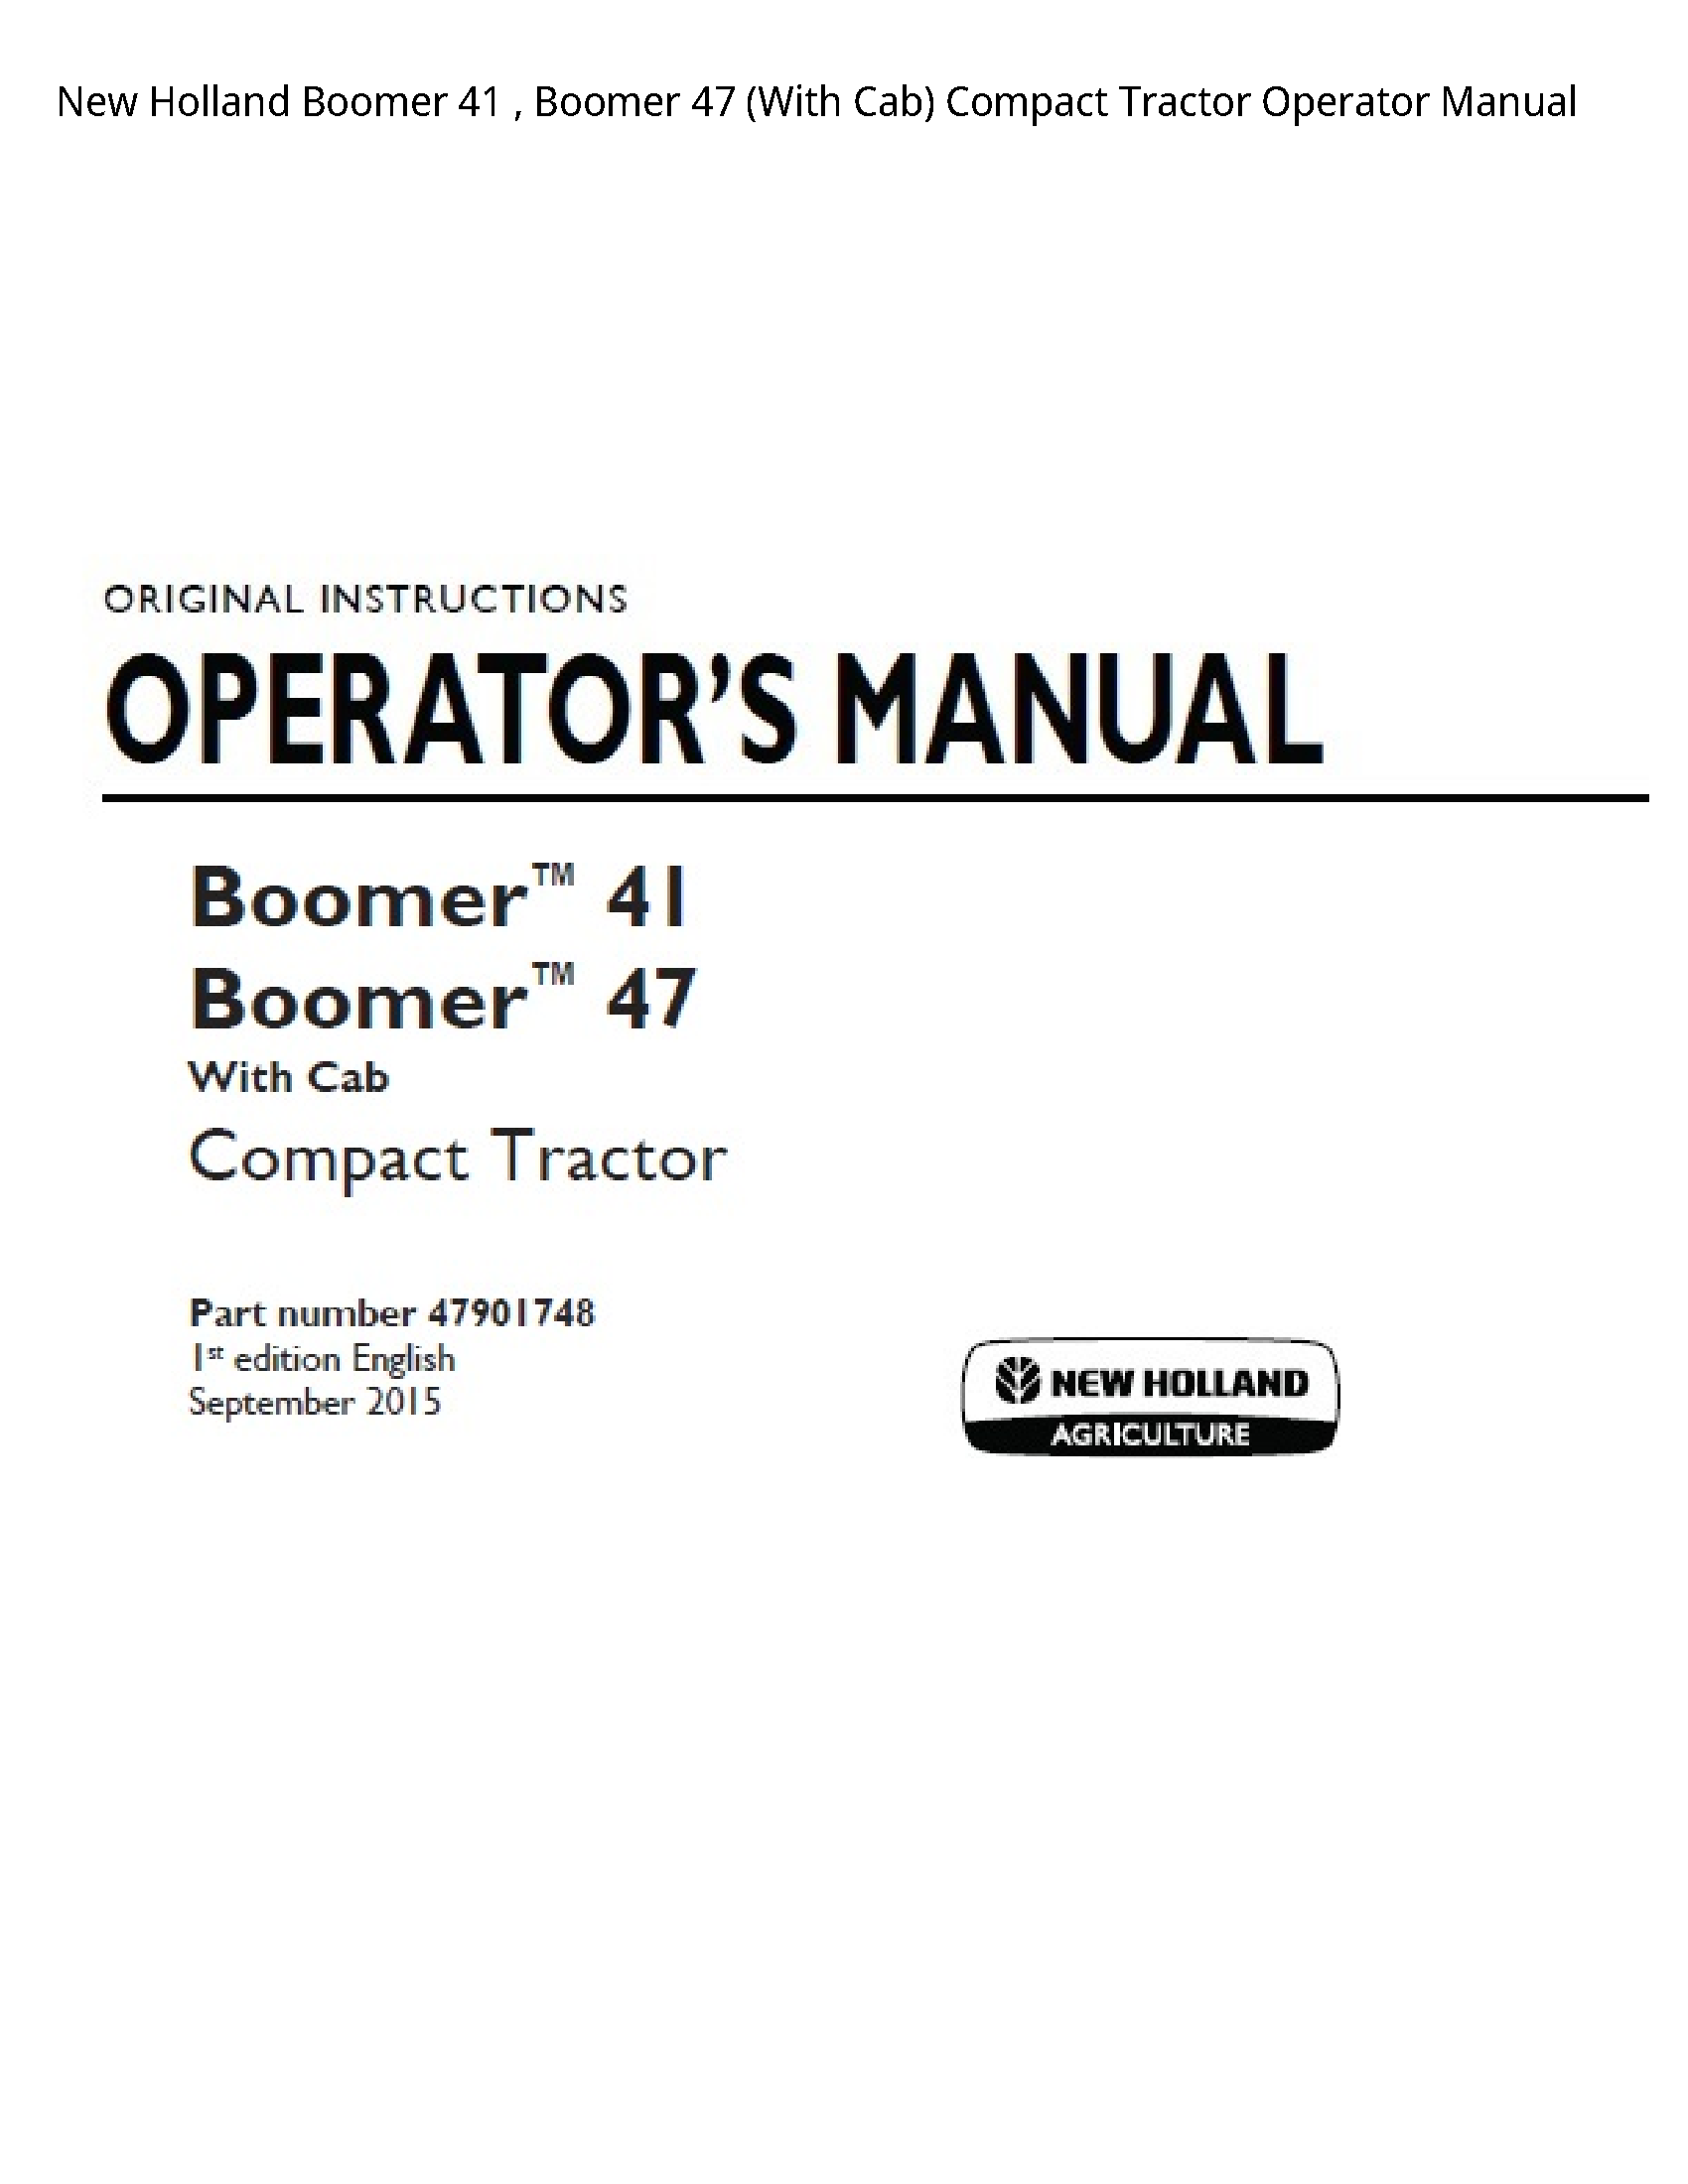 New Holland 41 Boomer Boomer (With Cab) Compact Tractor Operator manual